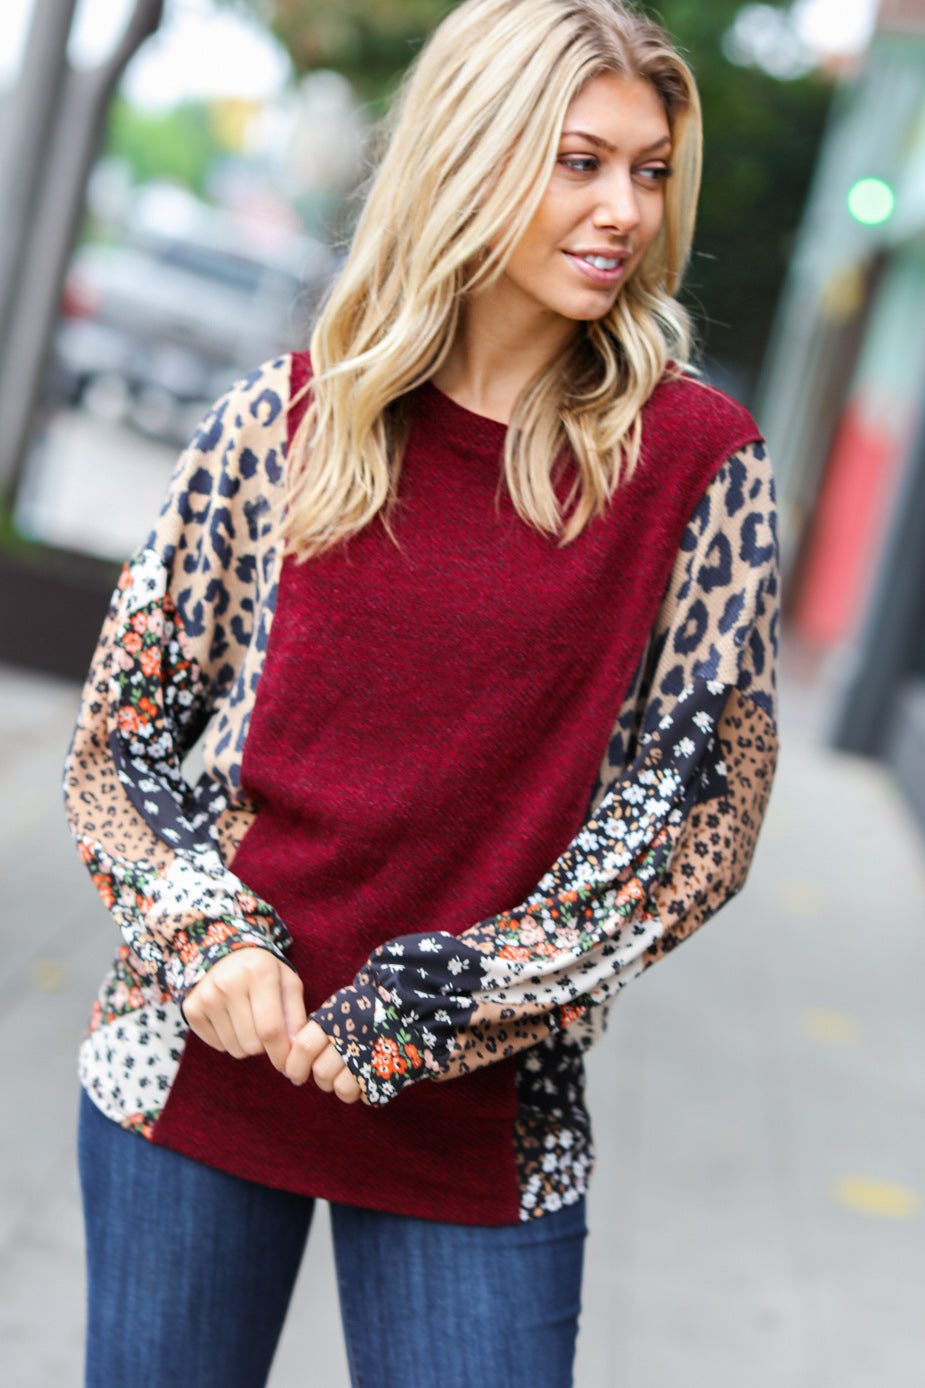 Feeling Bold Burgundy Two Tone Floral & Animal Print Top - Sybaritic Bags & Clothing